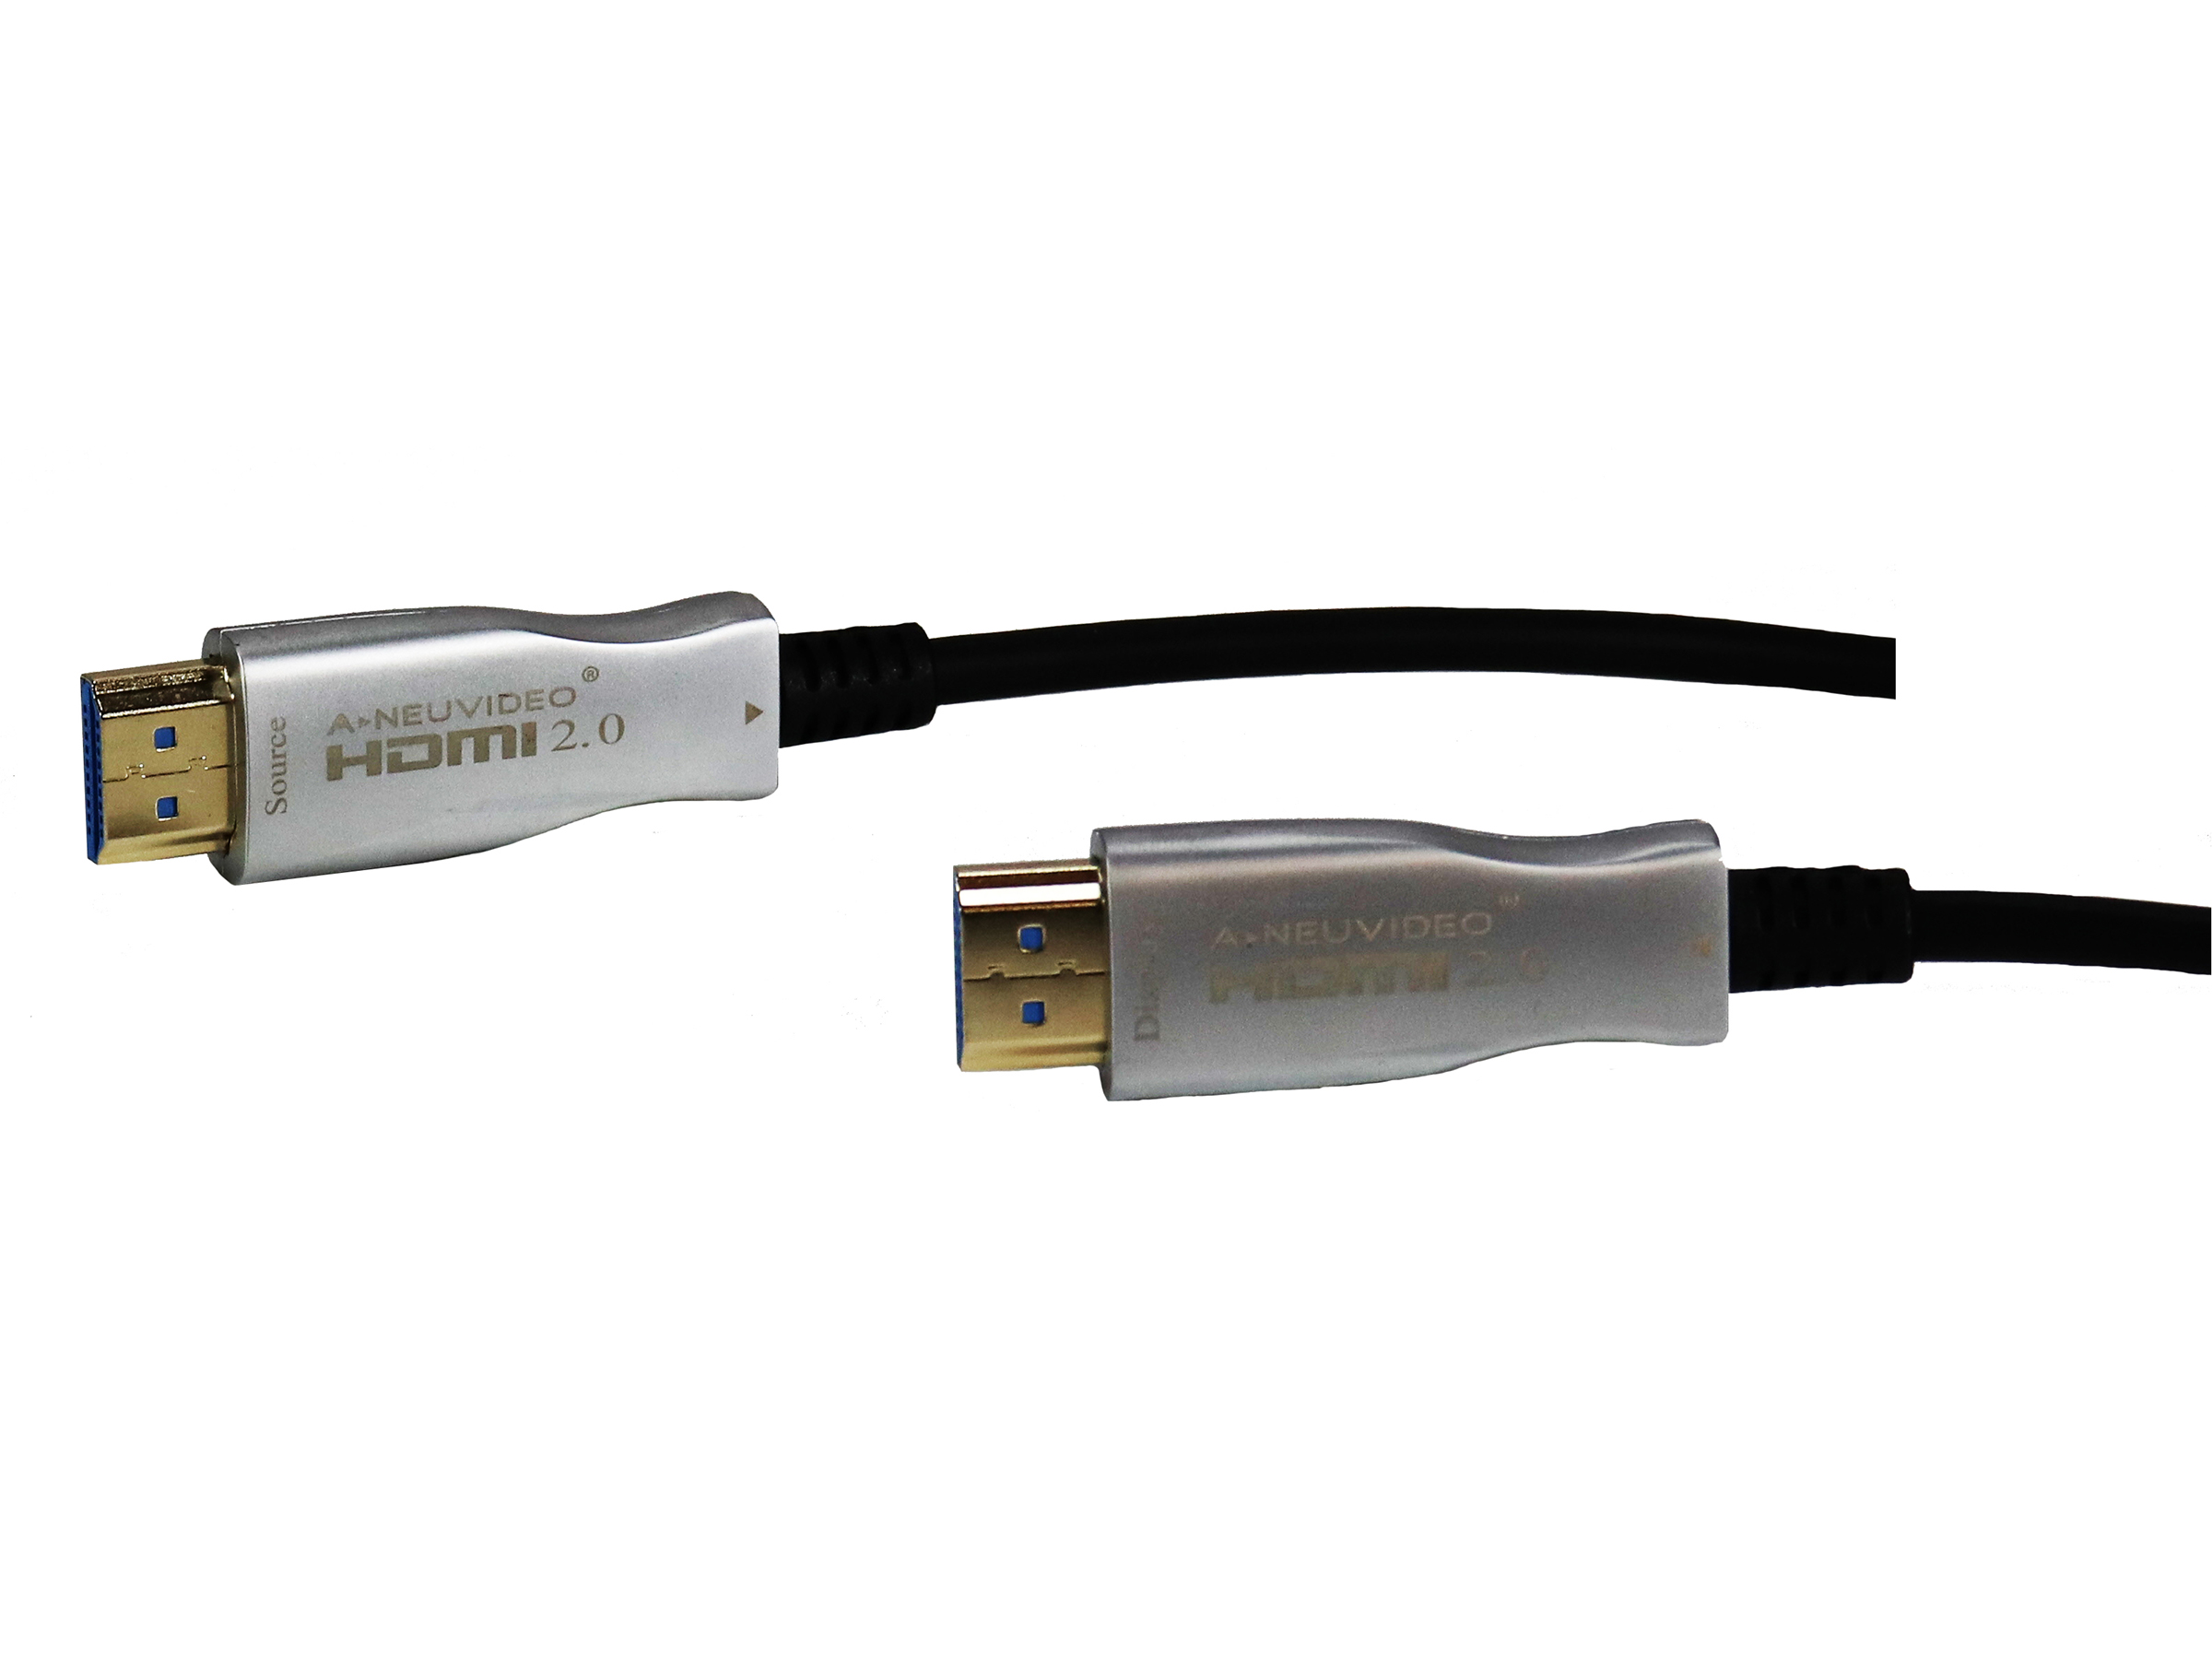 ANI-AOC-50 Fiber Optic Hdmi Active Optical Cable - 50m/164ft by A-NeuVideo